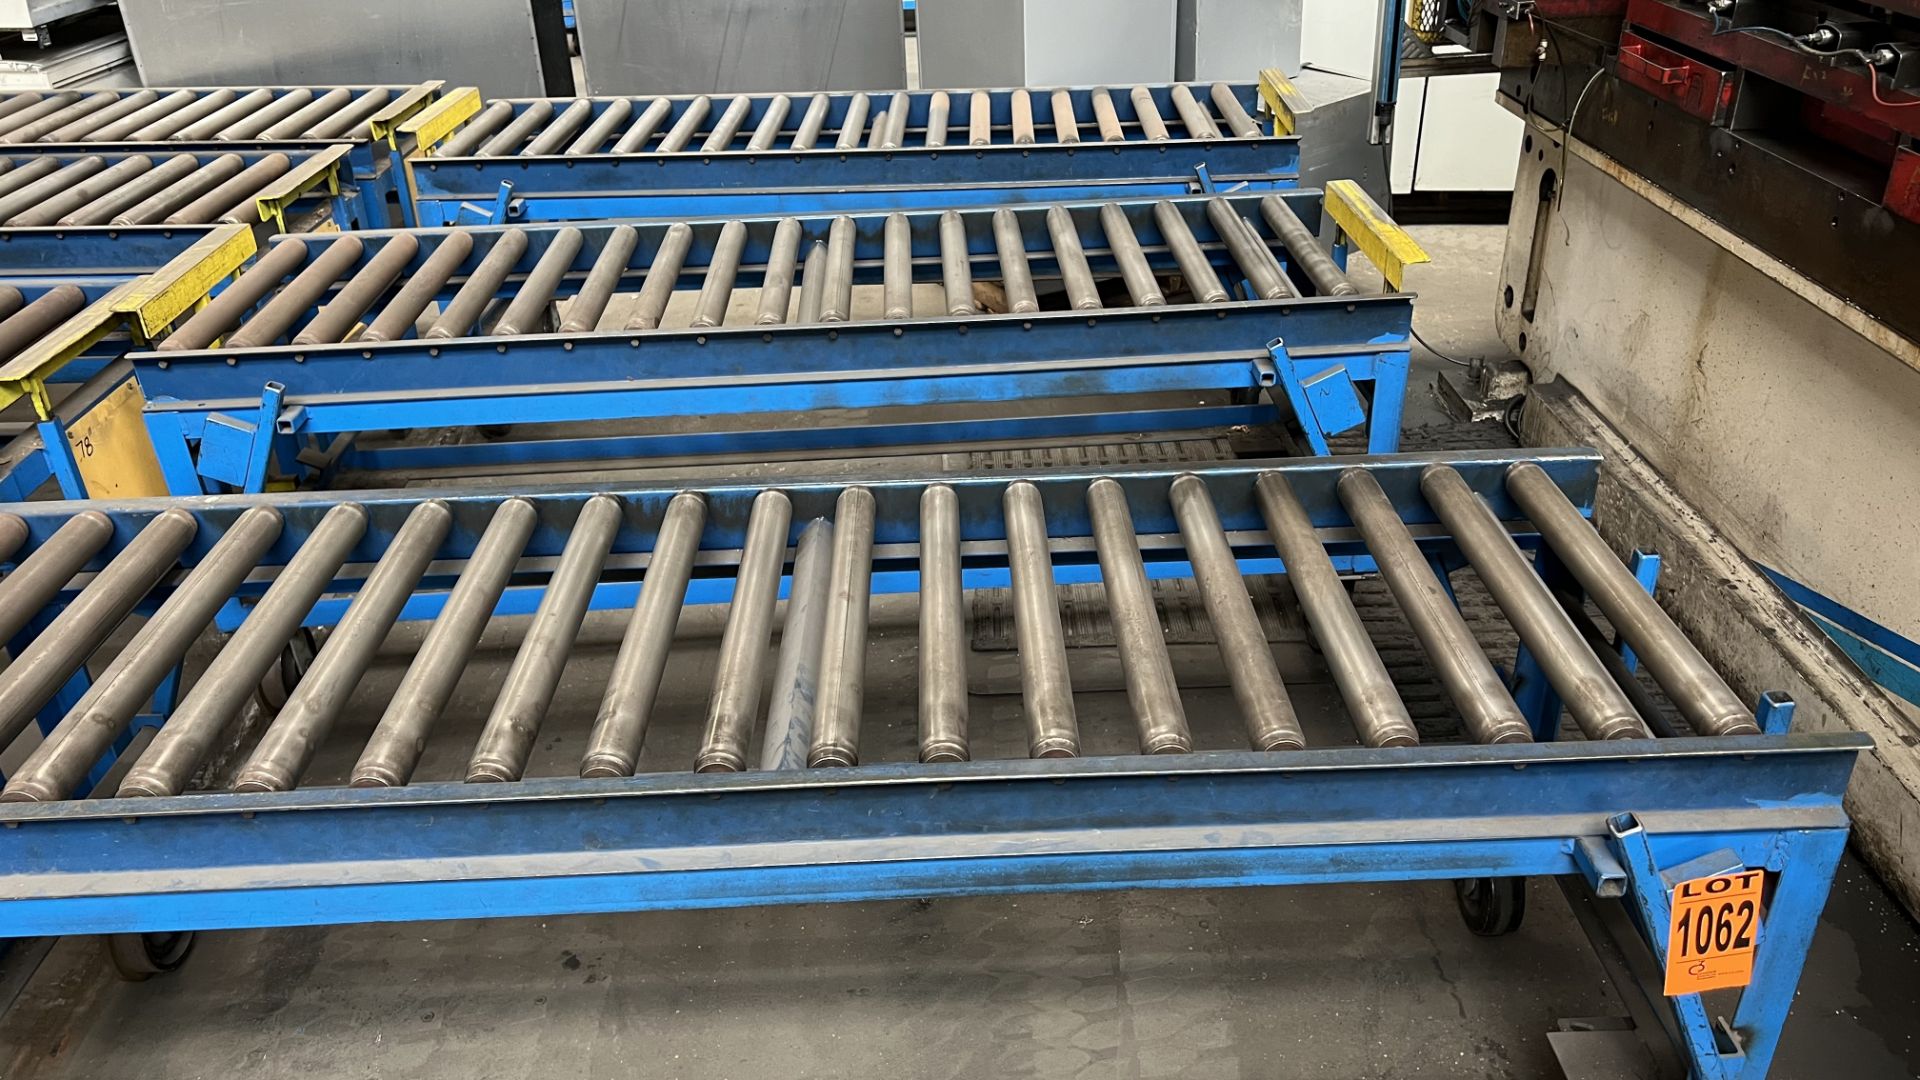 Lot of (3) steel frame manual roller conveyors on rail wheels and casters w/ adj. bumper bars